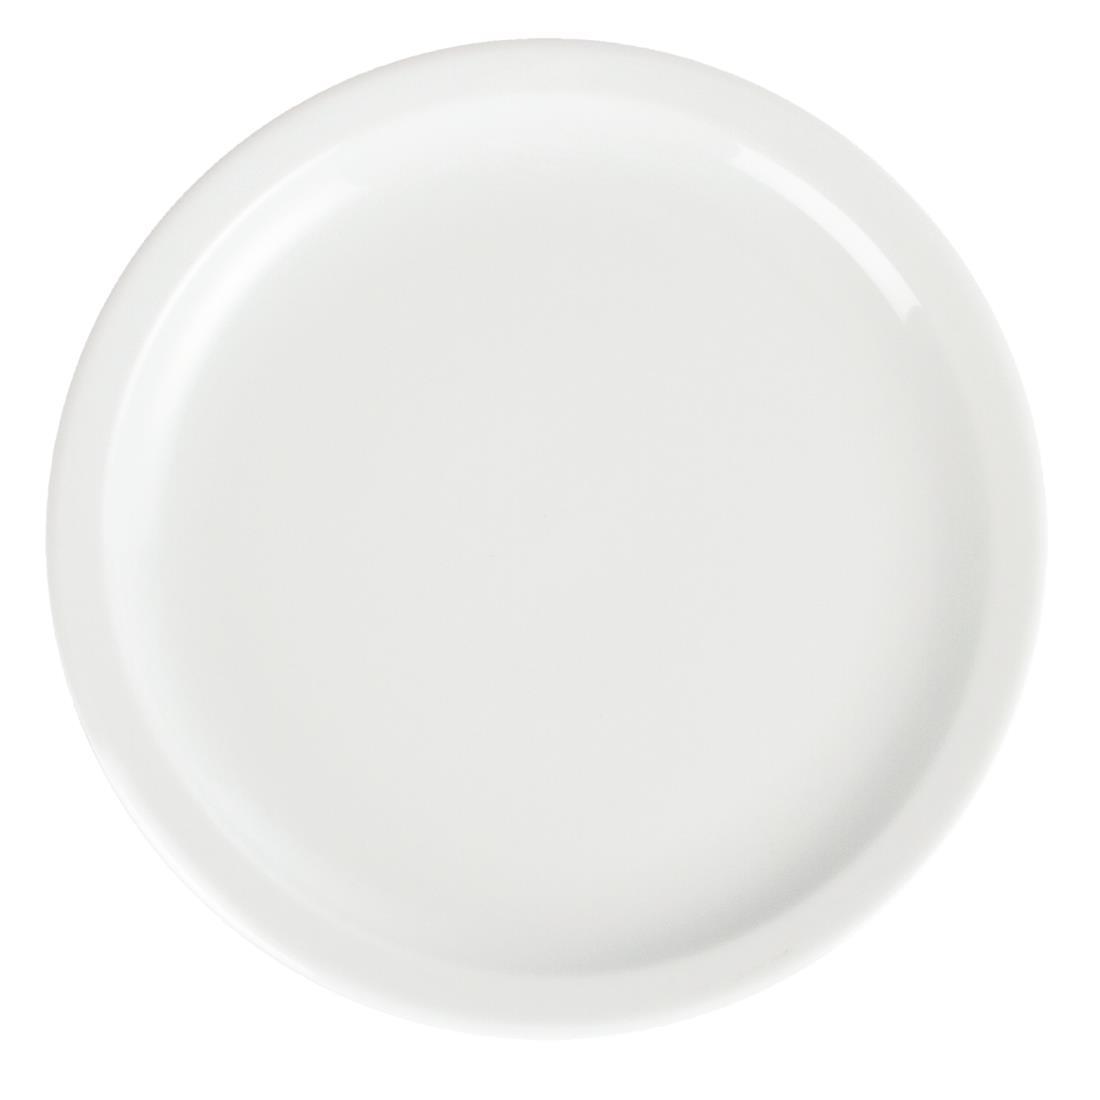 Olympia Whiteware Narrow Rimmed Plates 230mm (Pack of 12) - CB489  - 4